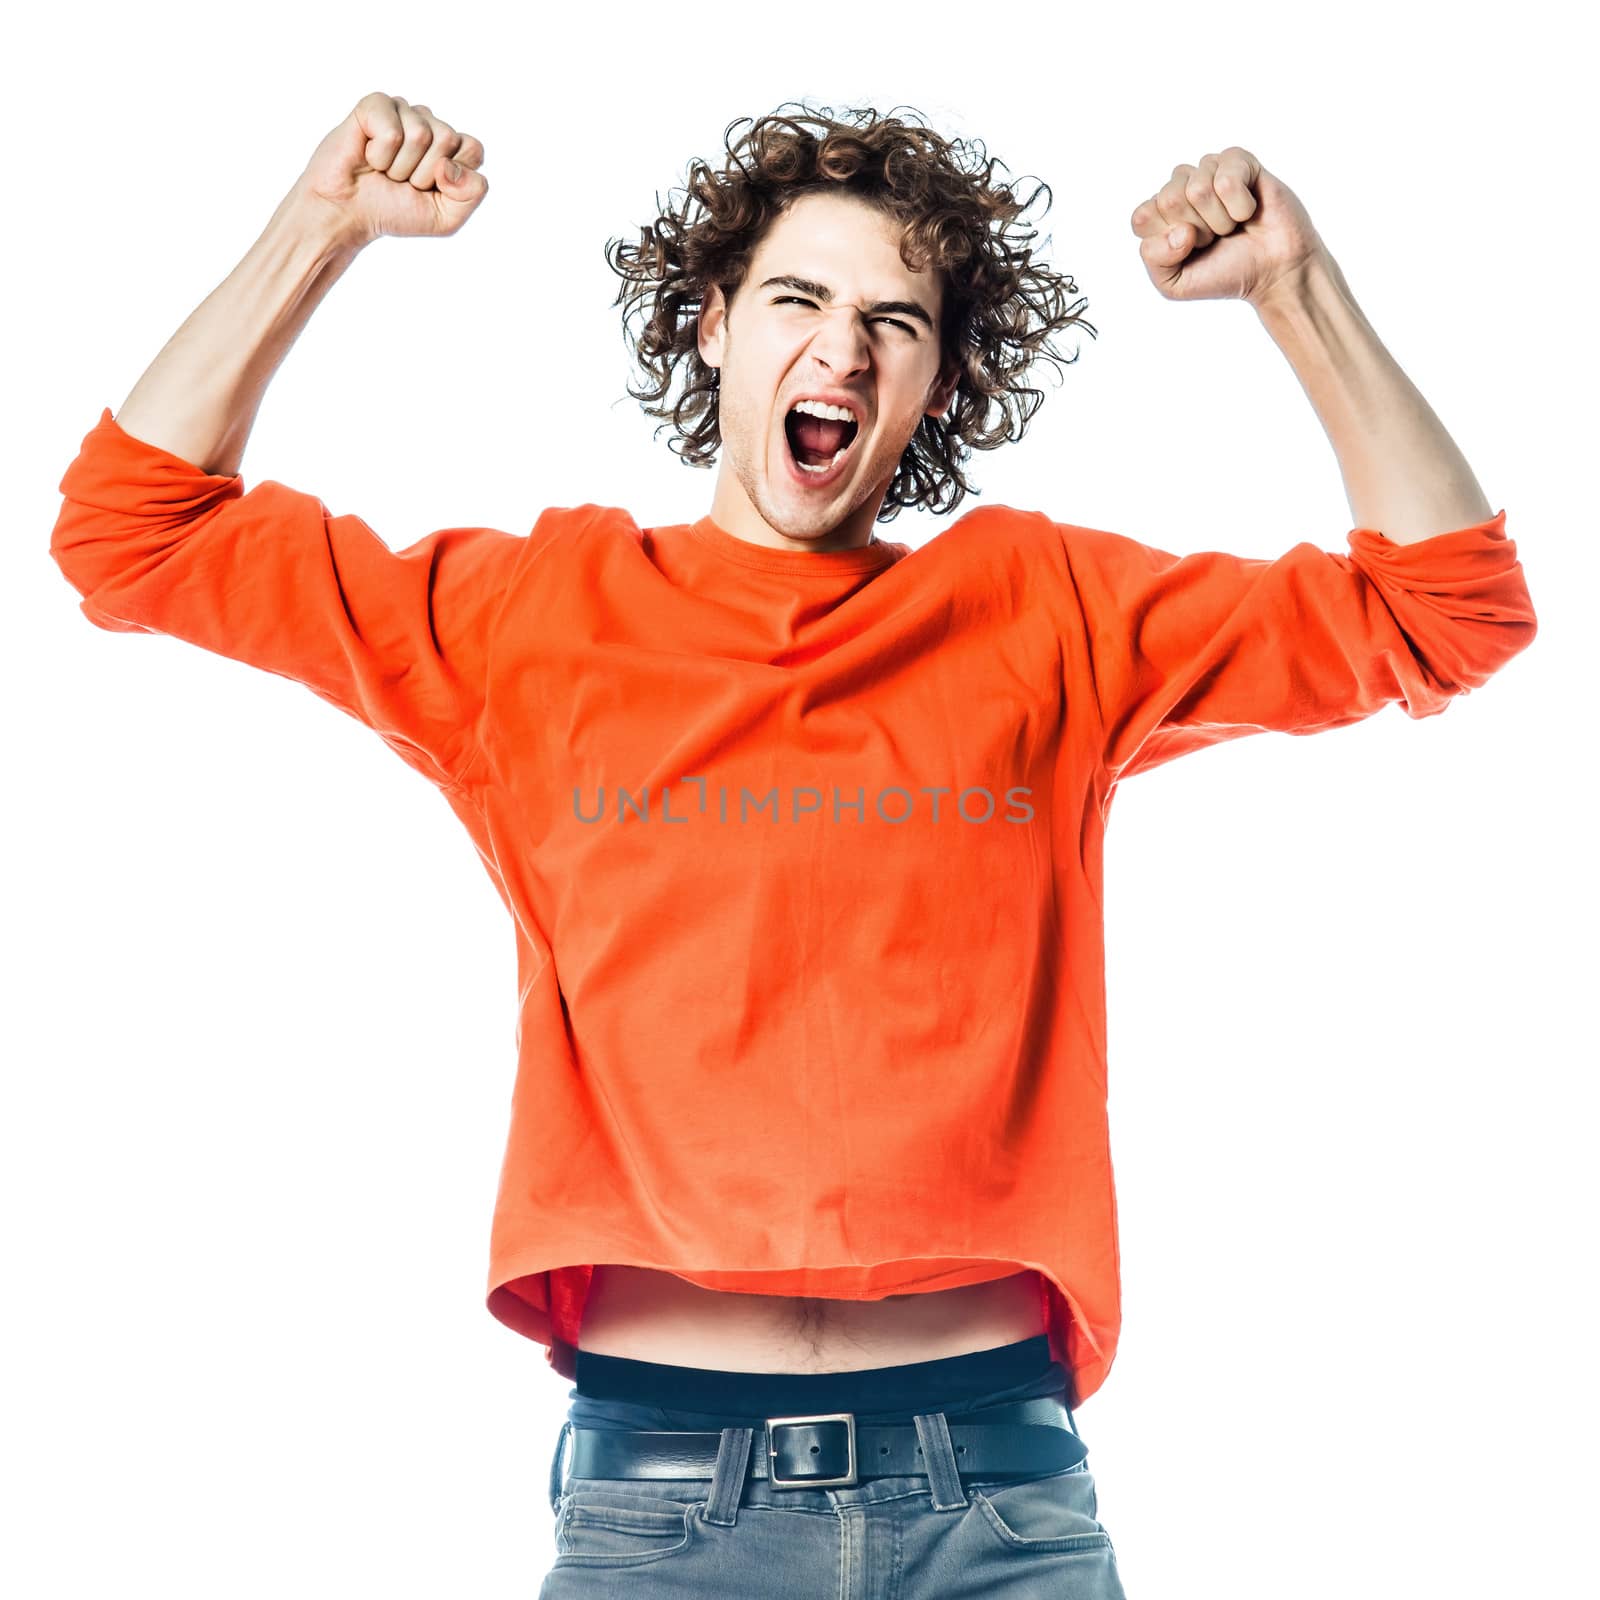 young man strong screaming happy portrait by PIXSTILL